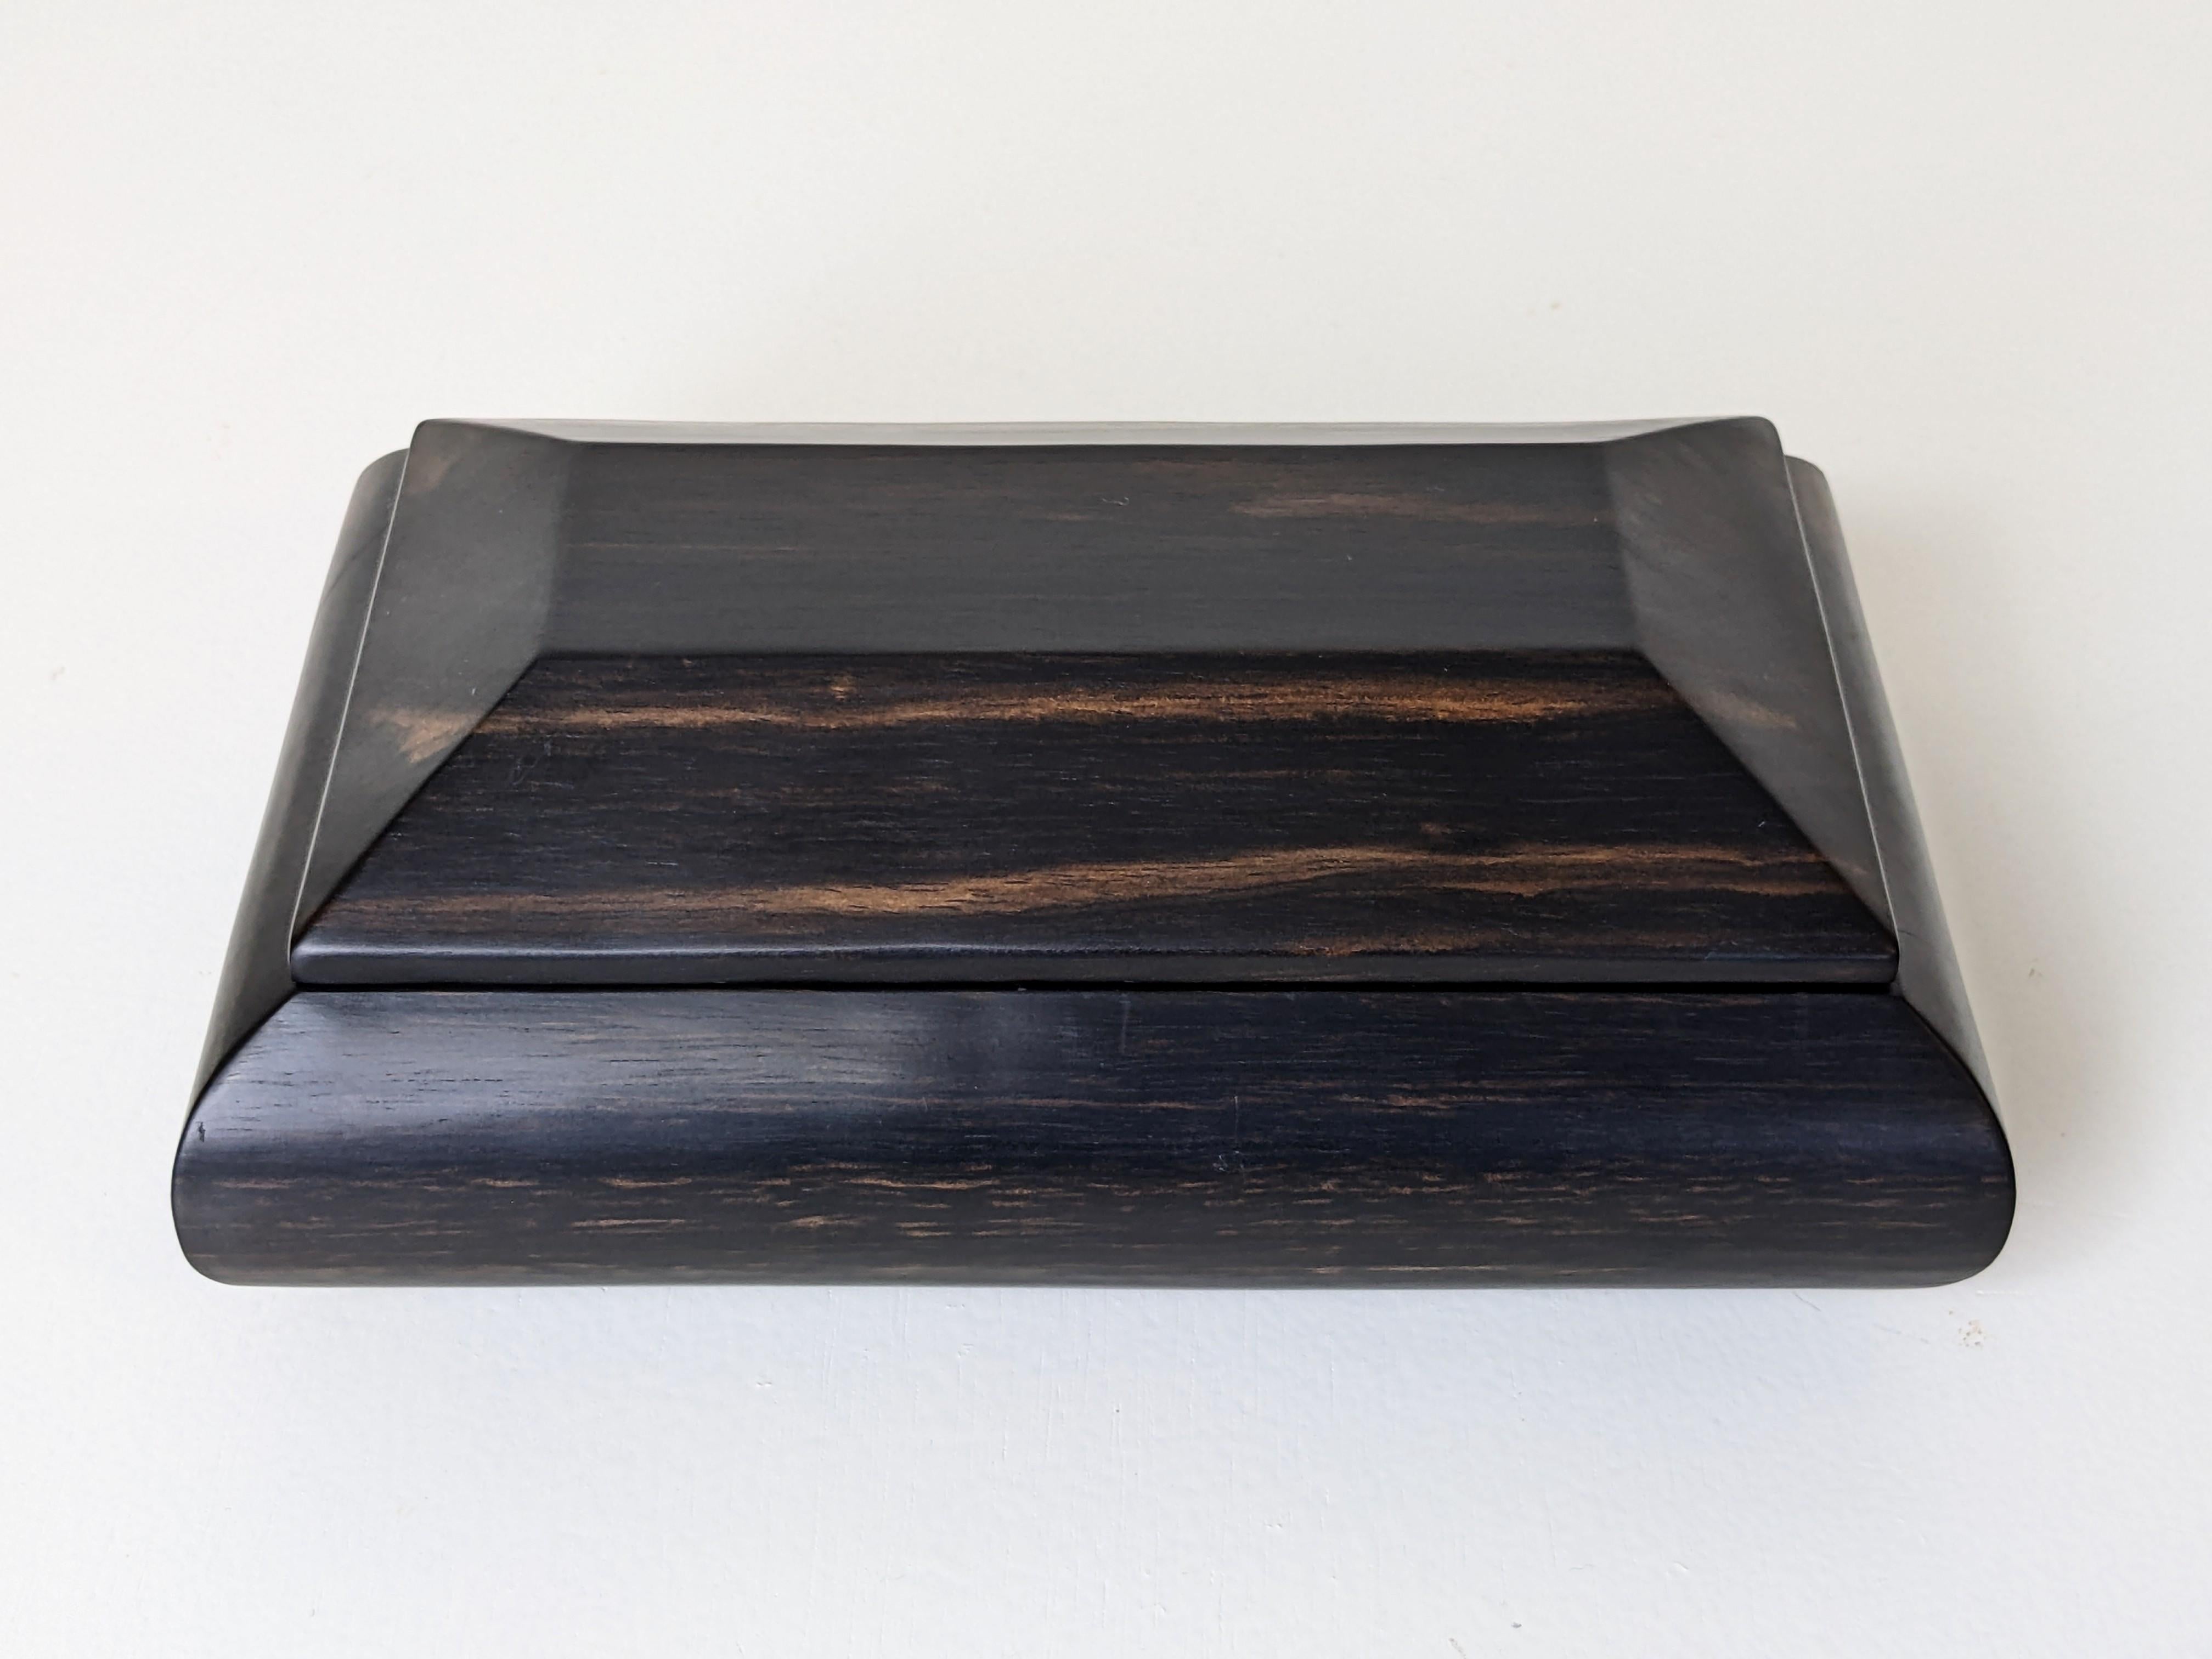 Art Deco Decorative Lidded Box in Solid Ebony Wood, France 1930s, 2 Available 7